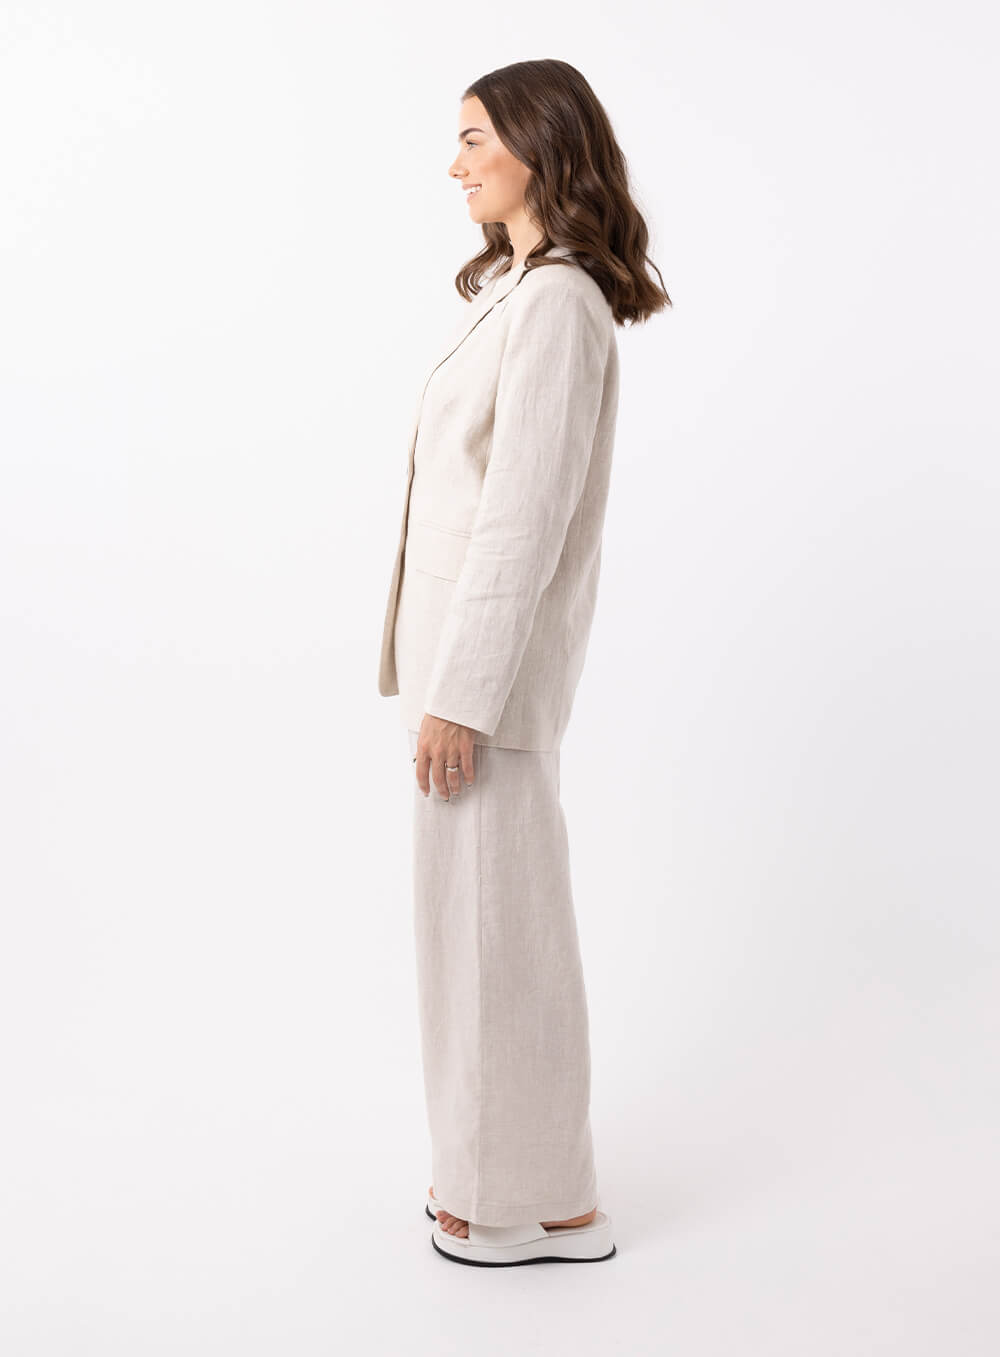 The Harper Linen Blazer has shoulder pads, is fully lined with tortoiseshell buttons and functional button closures. A tailored cut pocket with flap detailing.